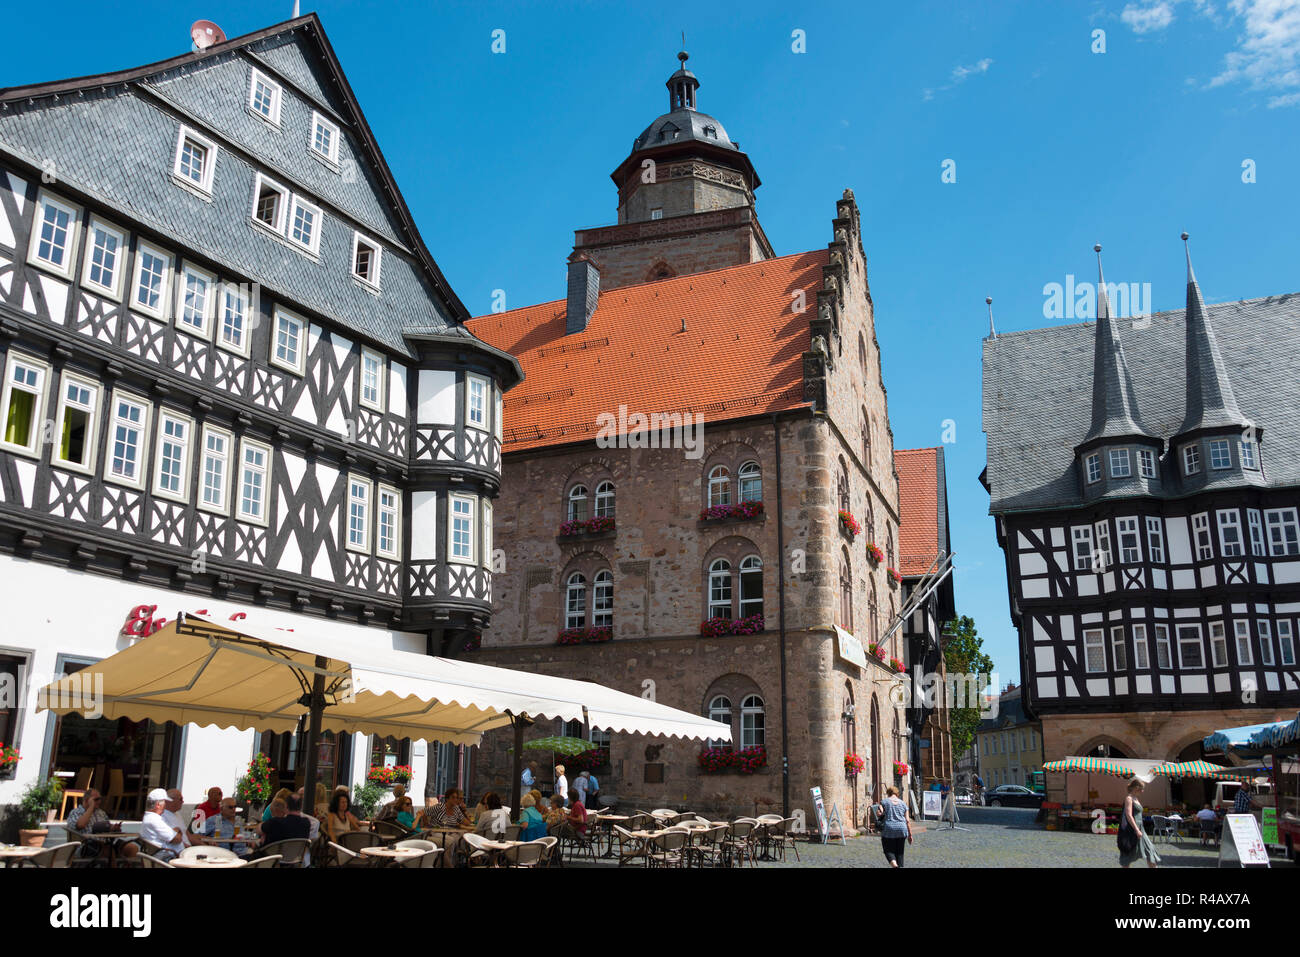 Bucking house, Wine house, town hall, market place, old town, Alsfeld, Hesse, Germany, Bückinghaus Stock Photo